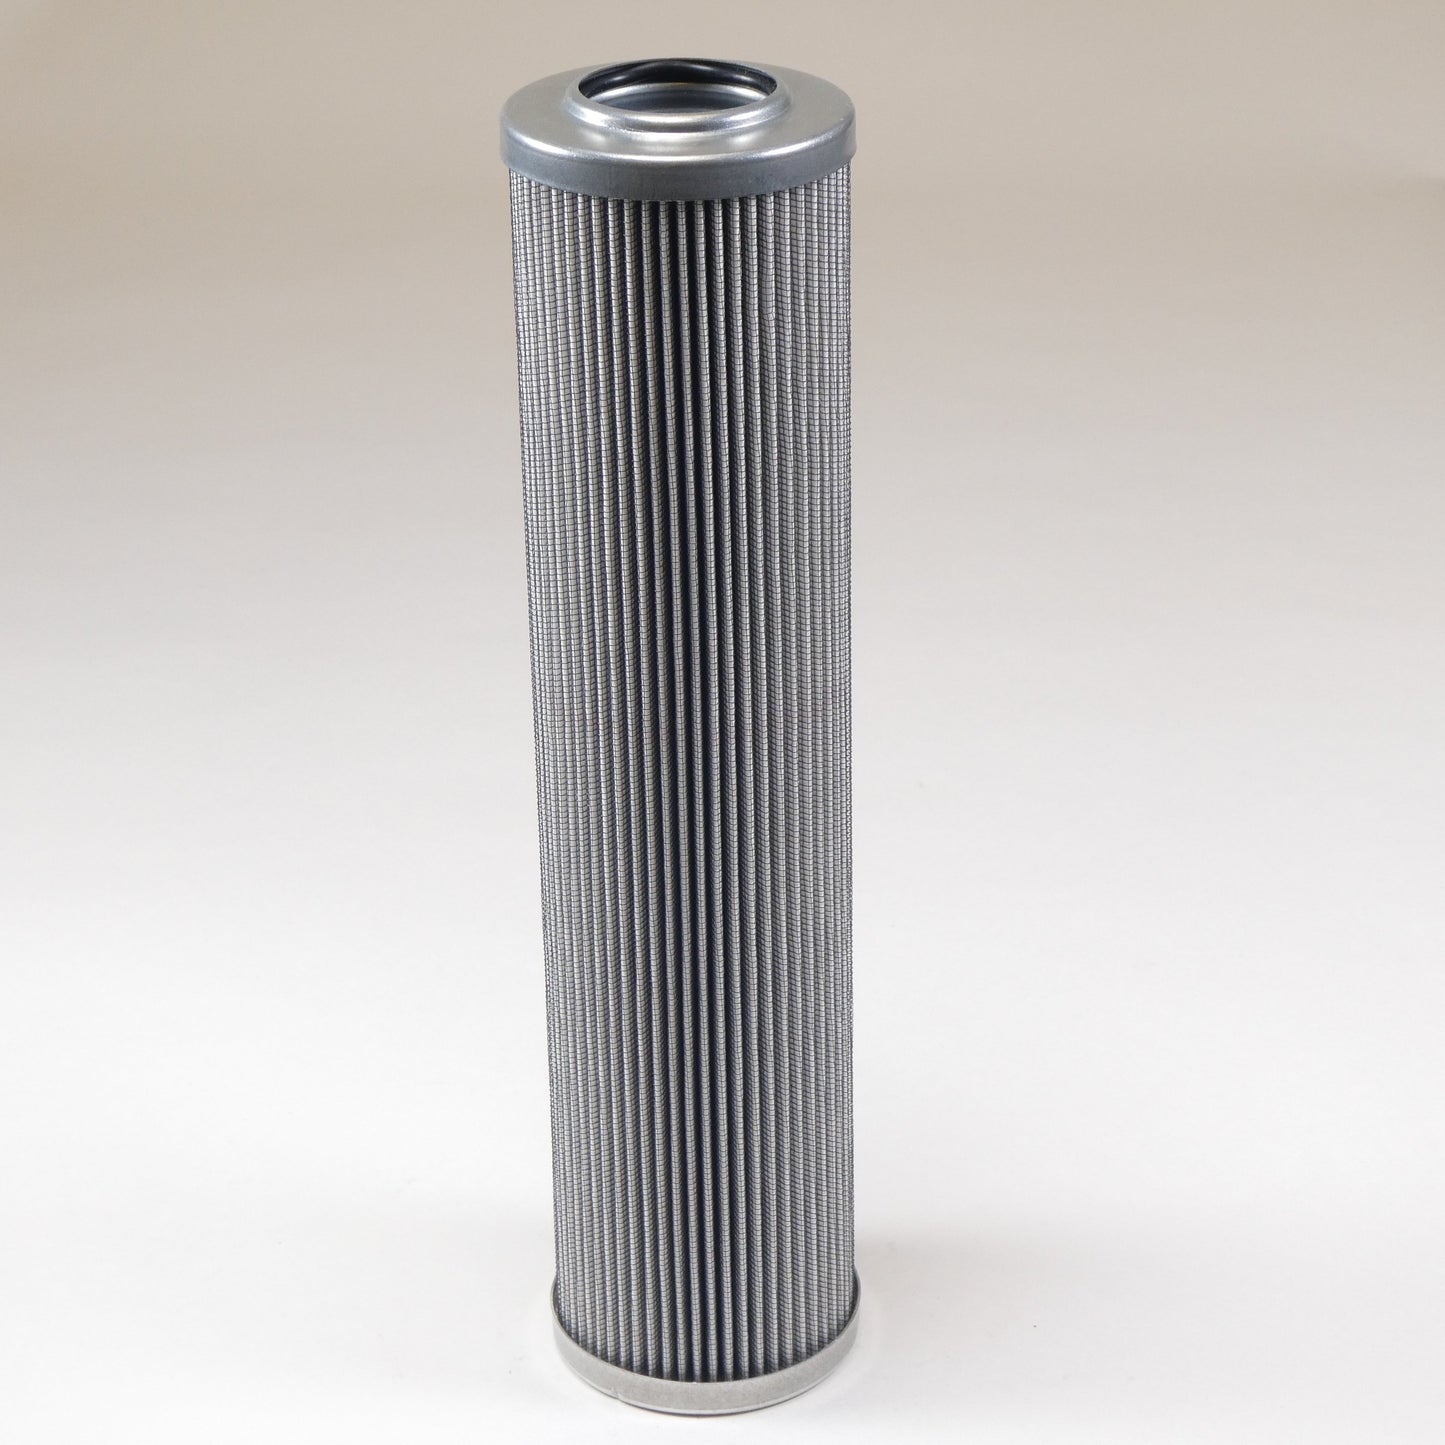 Hydrafil Replacement Filter Element for Donaldson DX2-9600-13-5UM